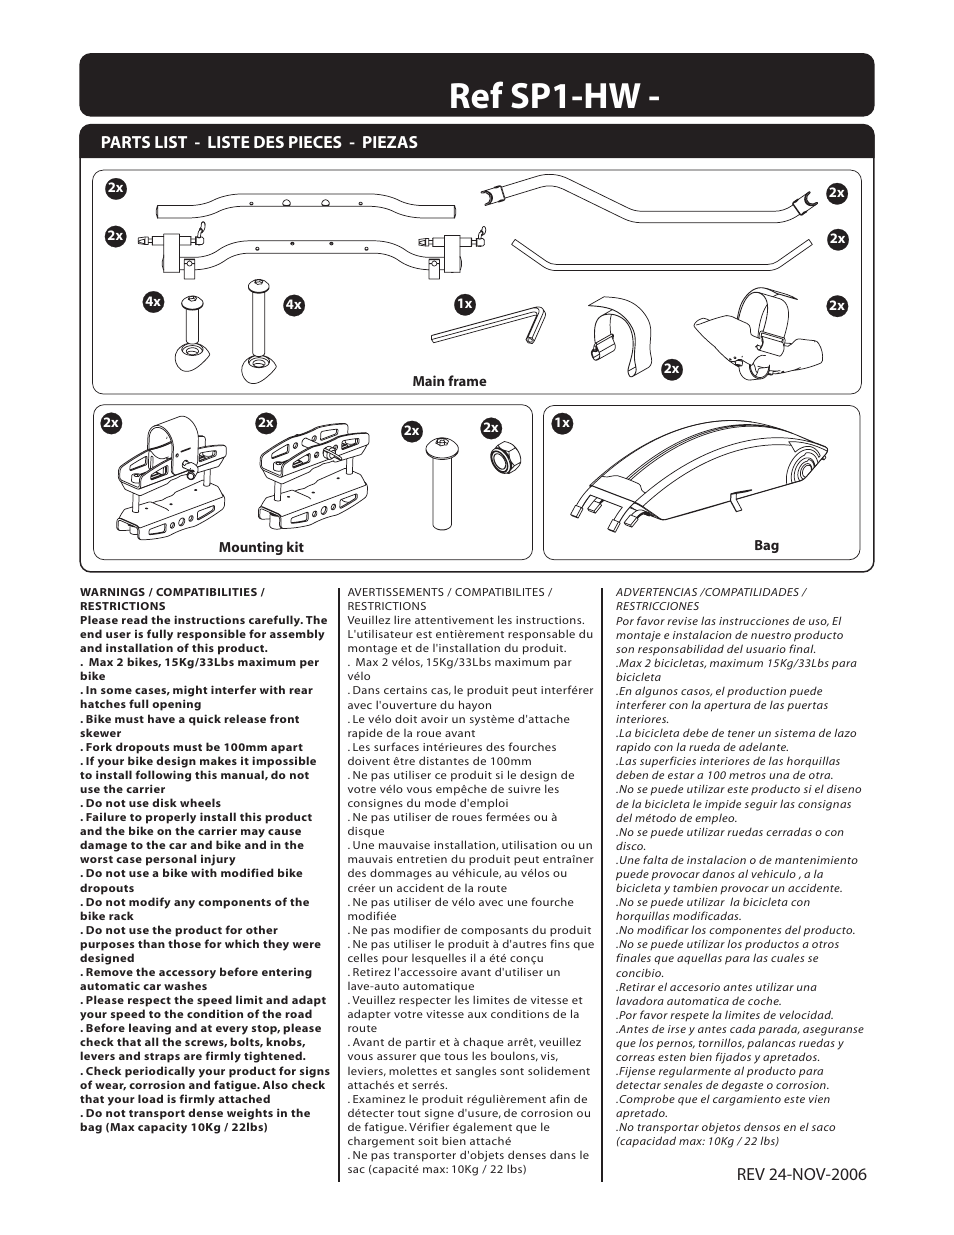 Hollywood Racks SP1-HW Buzz User Manual | 4 pages